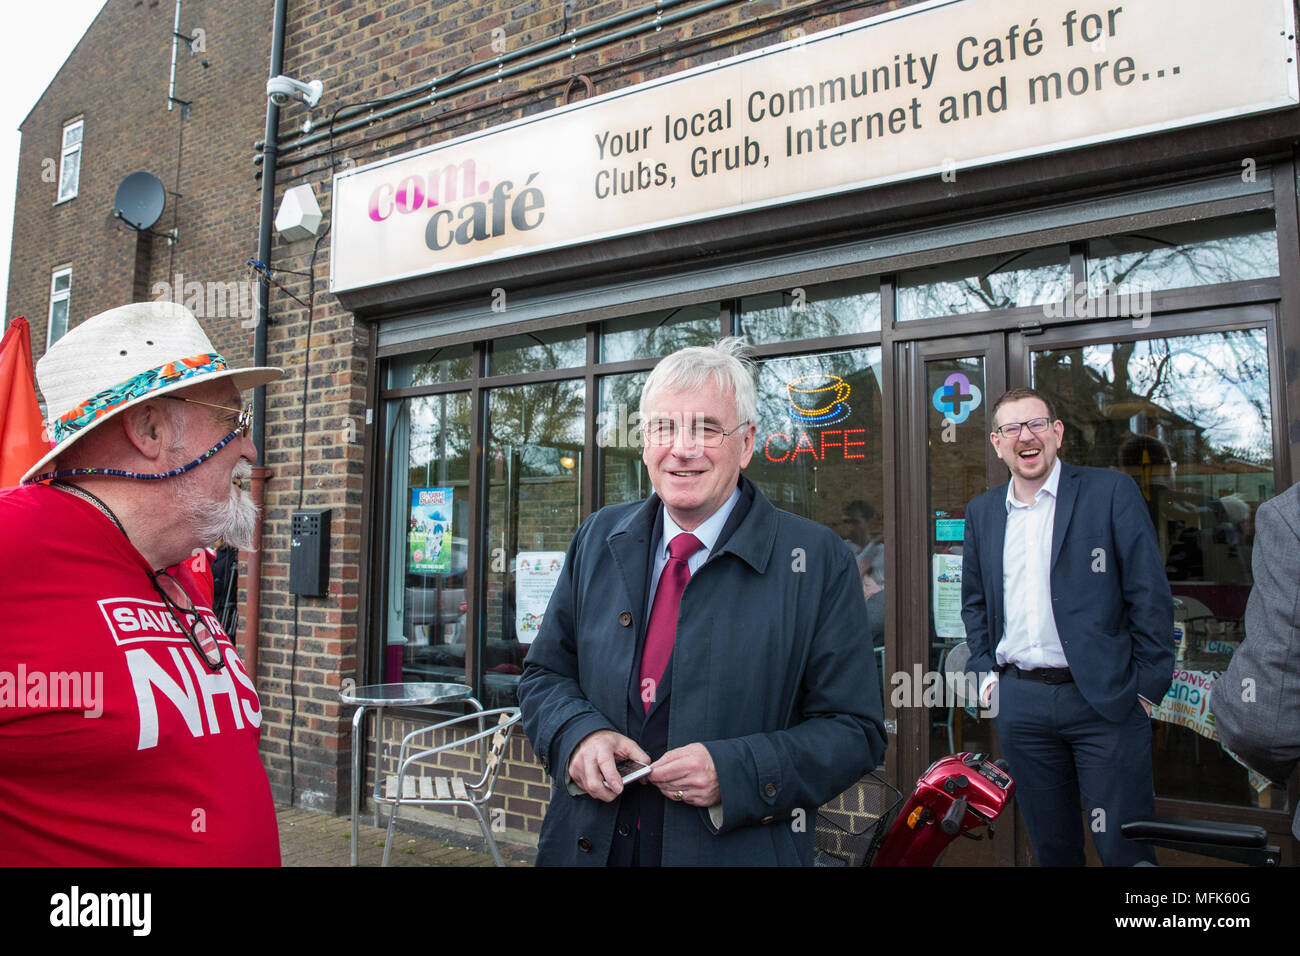 West Drayton, UK. 26th April, 2018. Shadow Chancellor John McDonnell and Shadow Secretary of State for Communities and Local Government Andrew Gwynne take part in local election campaigning for the Labour Party in Hillingdon. Credit: Mark Kerrison/Alamy Live News Stock Photo